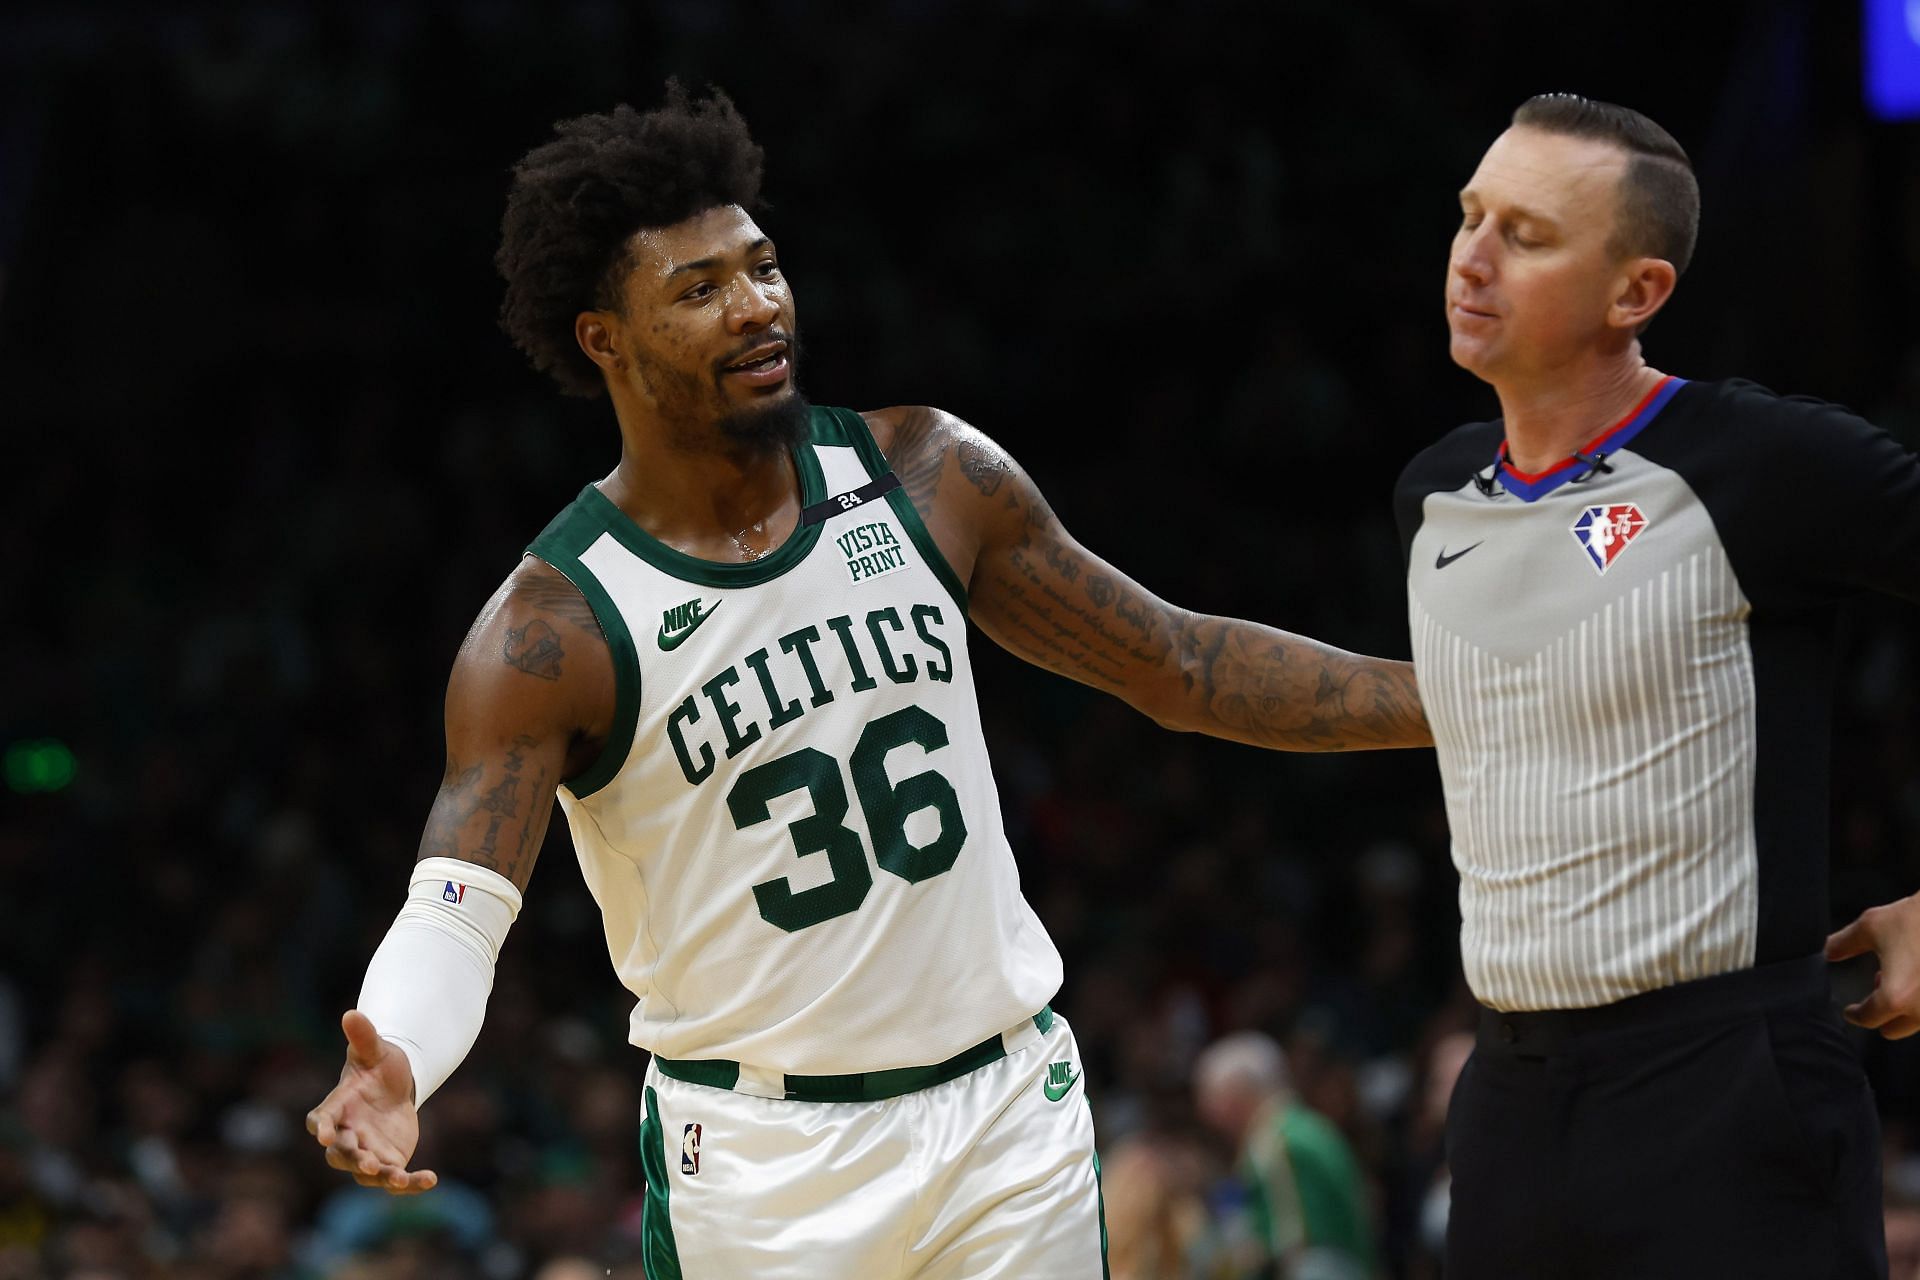 Boston Celtics guard Marcus Smart is heating up in the Defensive Player of the Year race